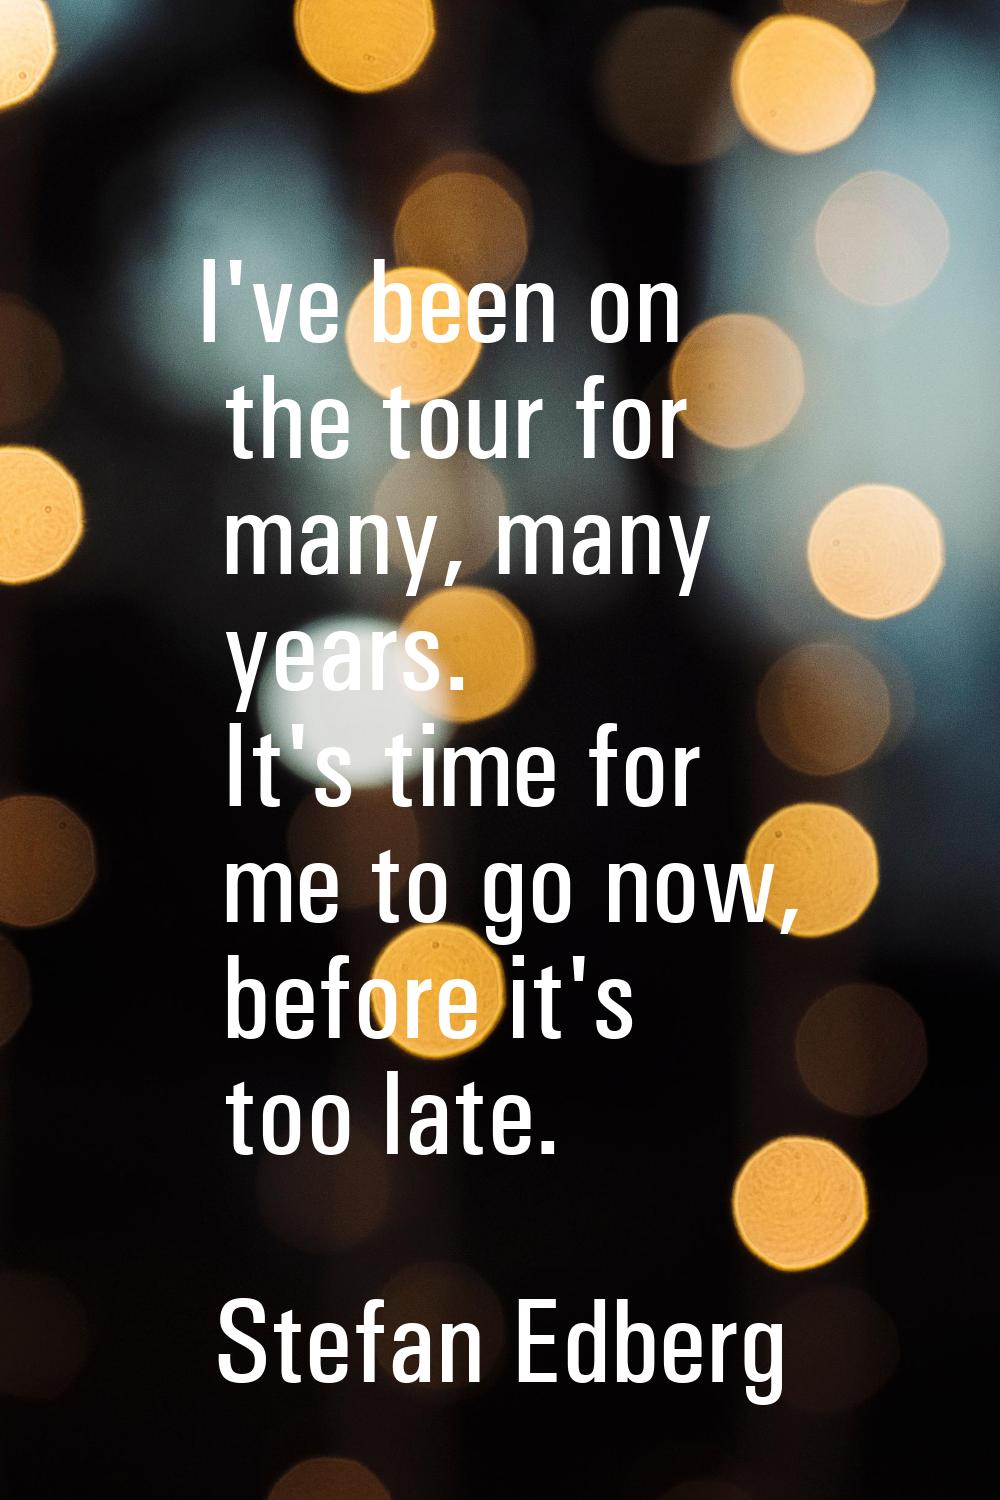 I've been on the tour for many, many years. It's time for me to go now, before it's too late.